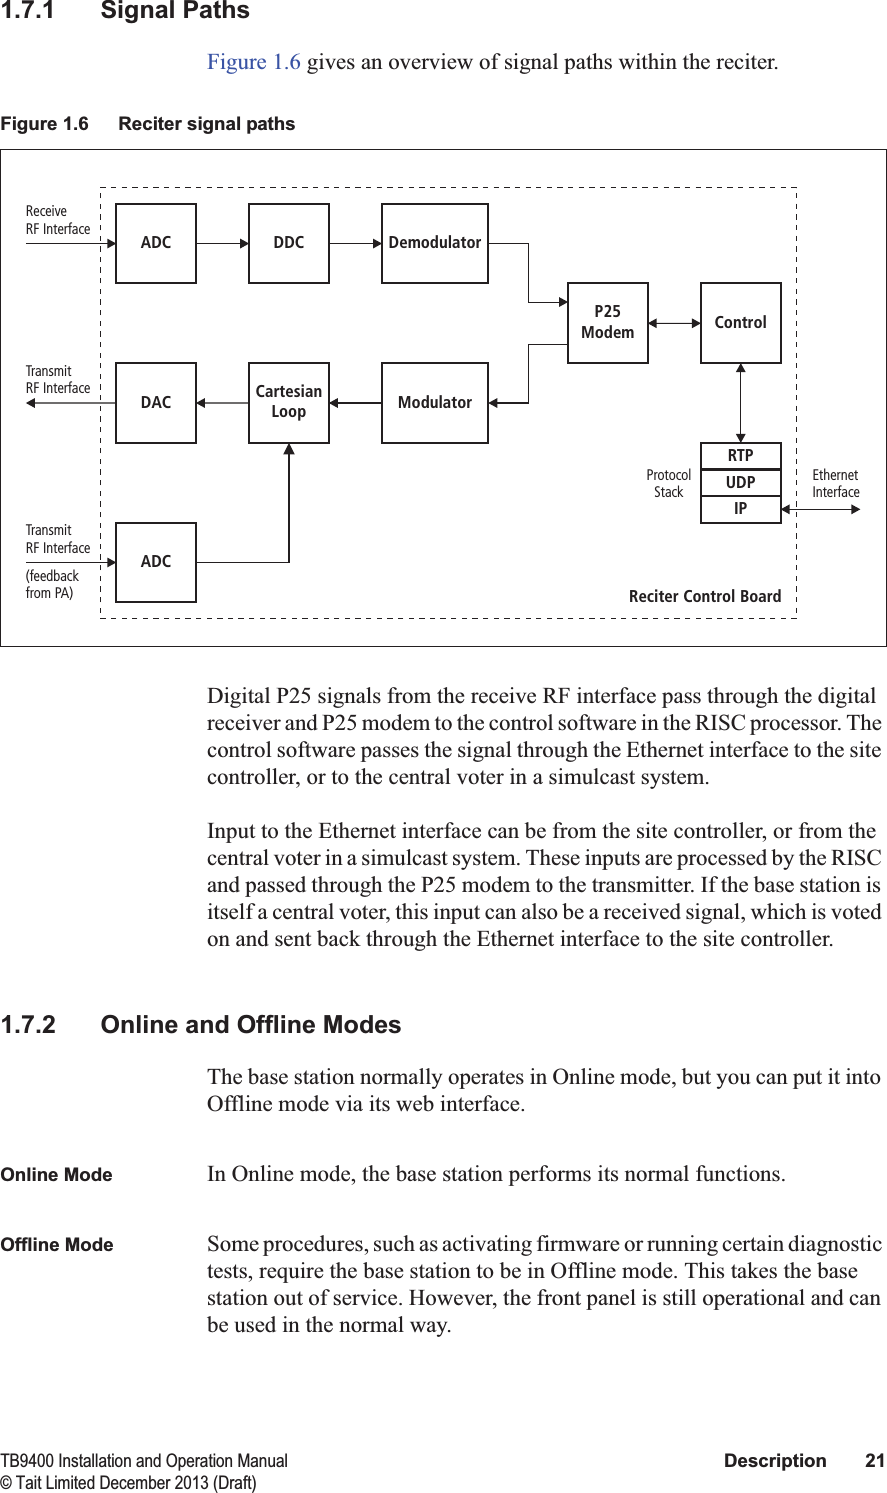  TB9400 Installation and Operation Manual Description 21© Tait Limited December 2013 (Draft)1.7.1 Signal PathsFigure 1.6 gives an overview of signal paths within the reciter. Digital P25 signals from the receive RF interface pass through the digital receiver and P25 modem to the control software in the RISC processor. The control software passes the signal through the Ethernet interface to the site controller, or to the central voter in a simulcast system.Input to the Ethernet interface can be from the site controller, or from the central voter in a simulcast system. These inputs are processed by the RISC and passed through the P25 modem to the transmitter. If the base station is itself a central voter, this input can also be a received signal, which is voted on and sent back through the Ethernet interface to the site controller.1.7.2 Online and Offline ModesThe base station normally operates in Online mode, but you can put it into Offline mode via its web interface.Online Mode In Online mode, the base station performs its normal functions. Offline Mode Some procedures, such as activating firmware or running certain diagnostic tests, require the base station to be in Offline mode. This takes the base station out of service. However, the front panel is still operational and can be used in the normal way. Figure 1.6 Reciter signal pathsModulatorDemodulatorP25ModemCartesianLoopControlADCADCDDCDACRTPUDPIPTransmitRF InterfaceTransmitRF Interface(feedbackfrom PA)ReceiveRF InterfaceEthernetInterfaceProtocolStackReciter Control Board